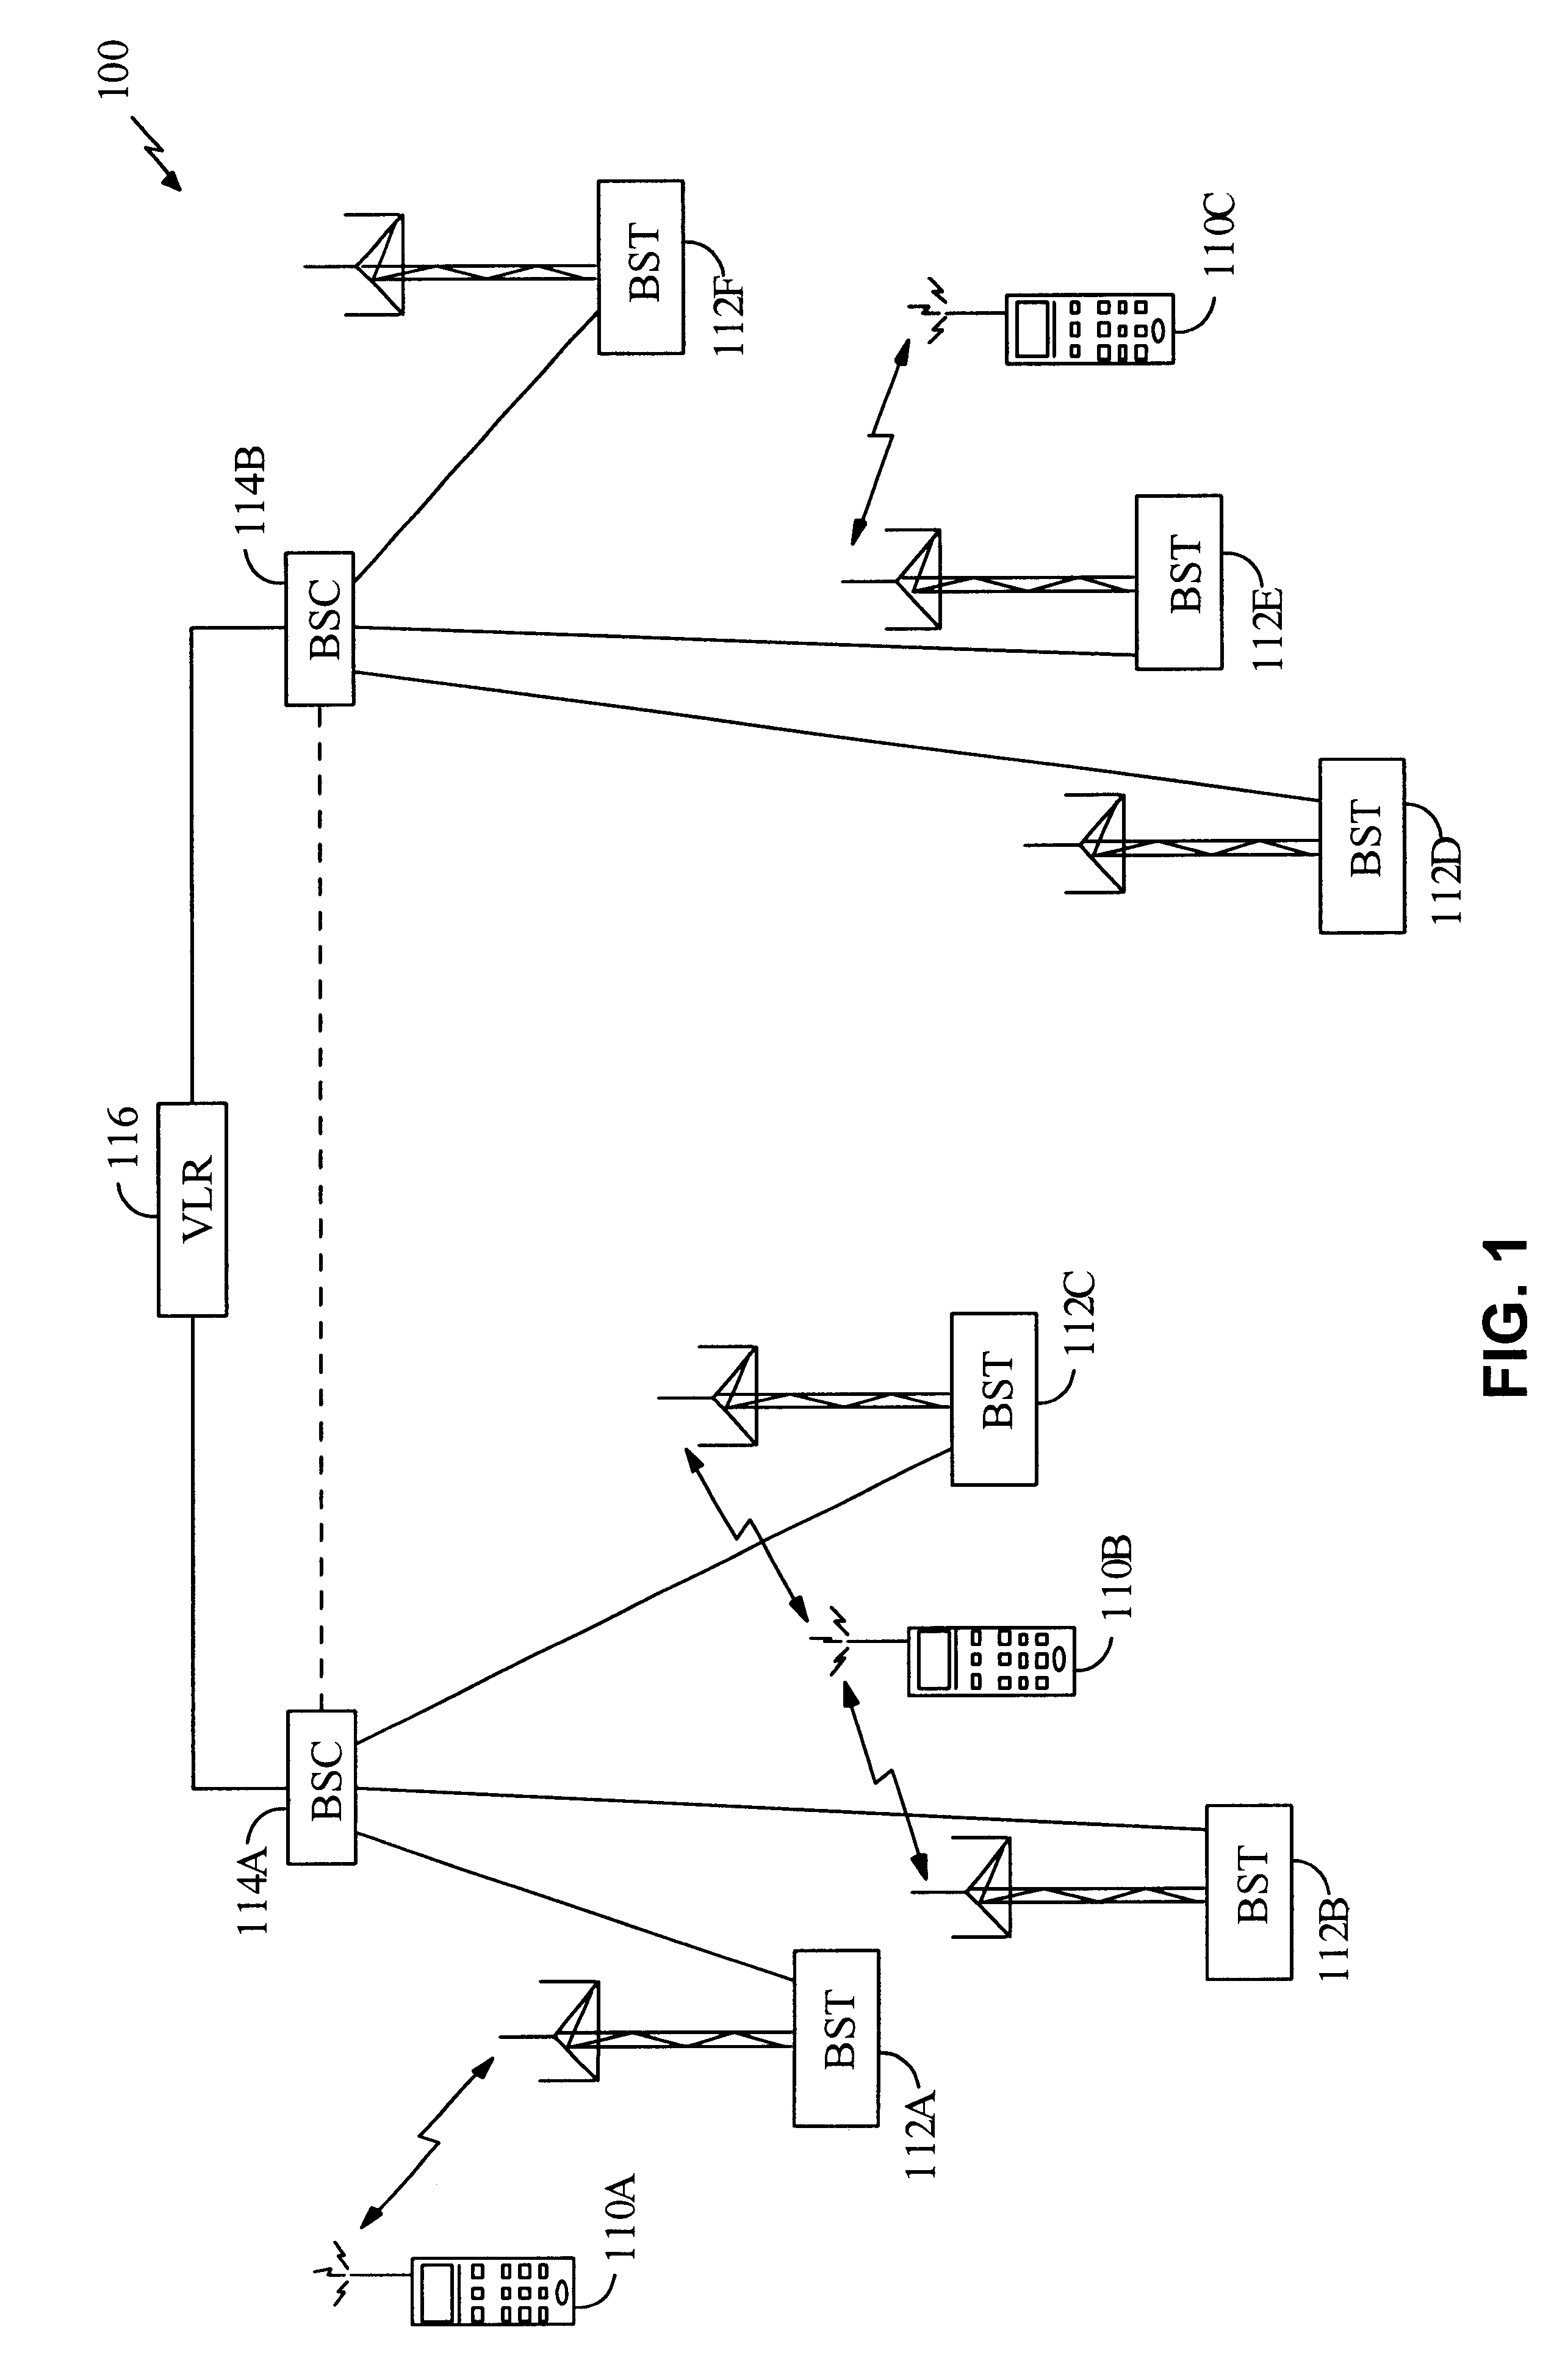 Method and apparatus for providing configurable layers and protocols in a communications system